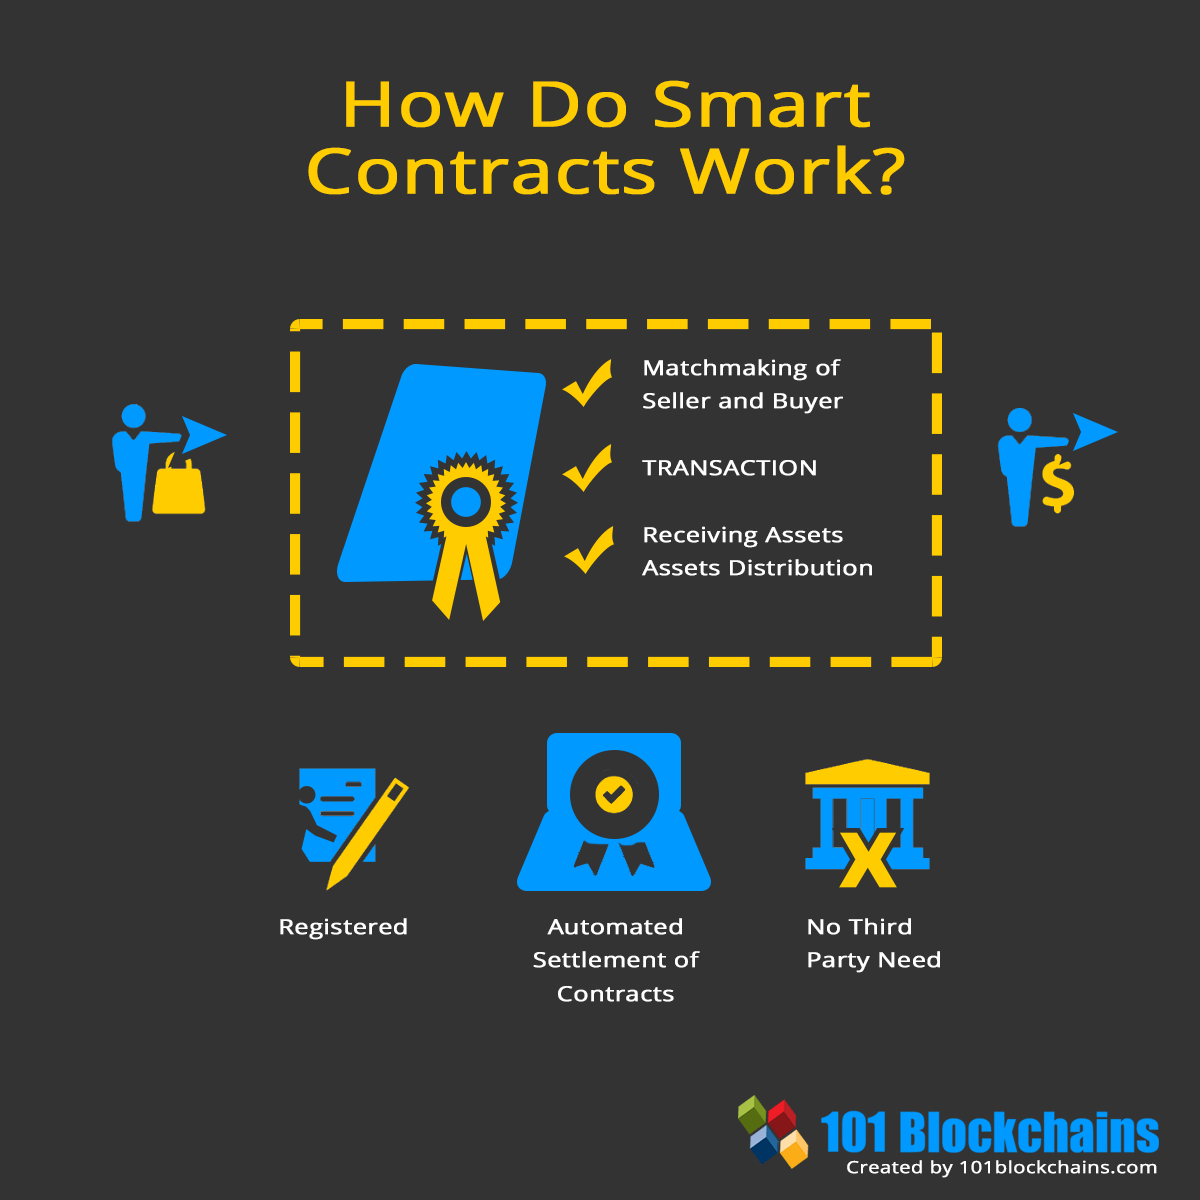 How Do Smart Contracts Work